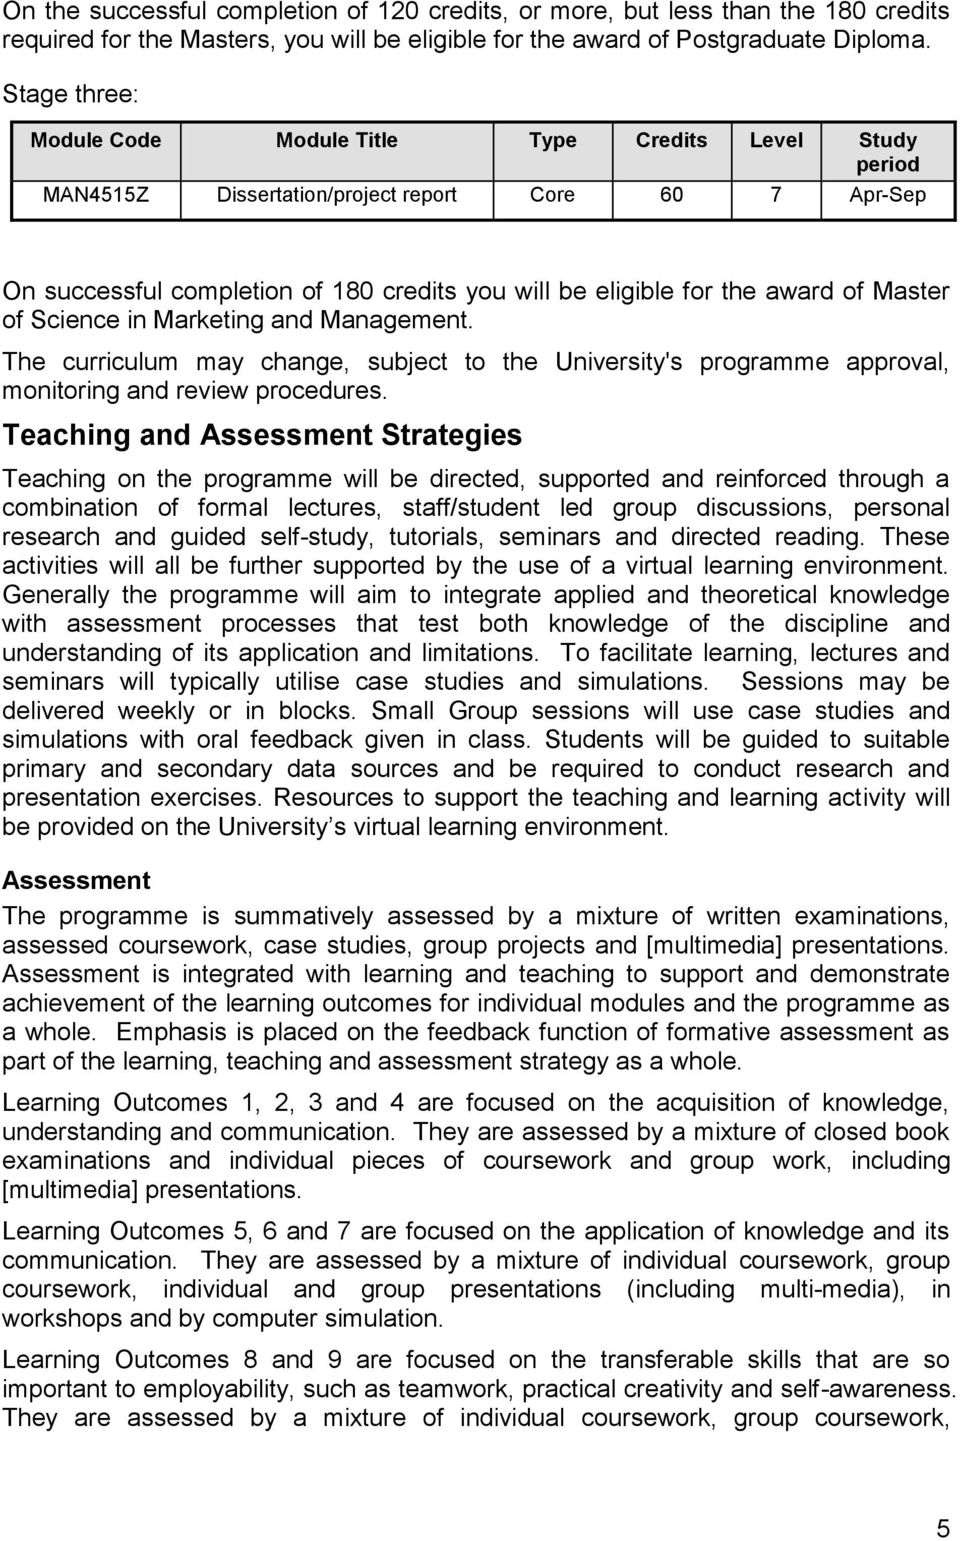 of Master of Science in Marketing and Management. The curriculum may change, subject to the University's programme approval, monitoring and review procedures.